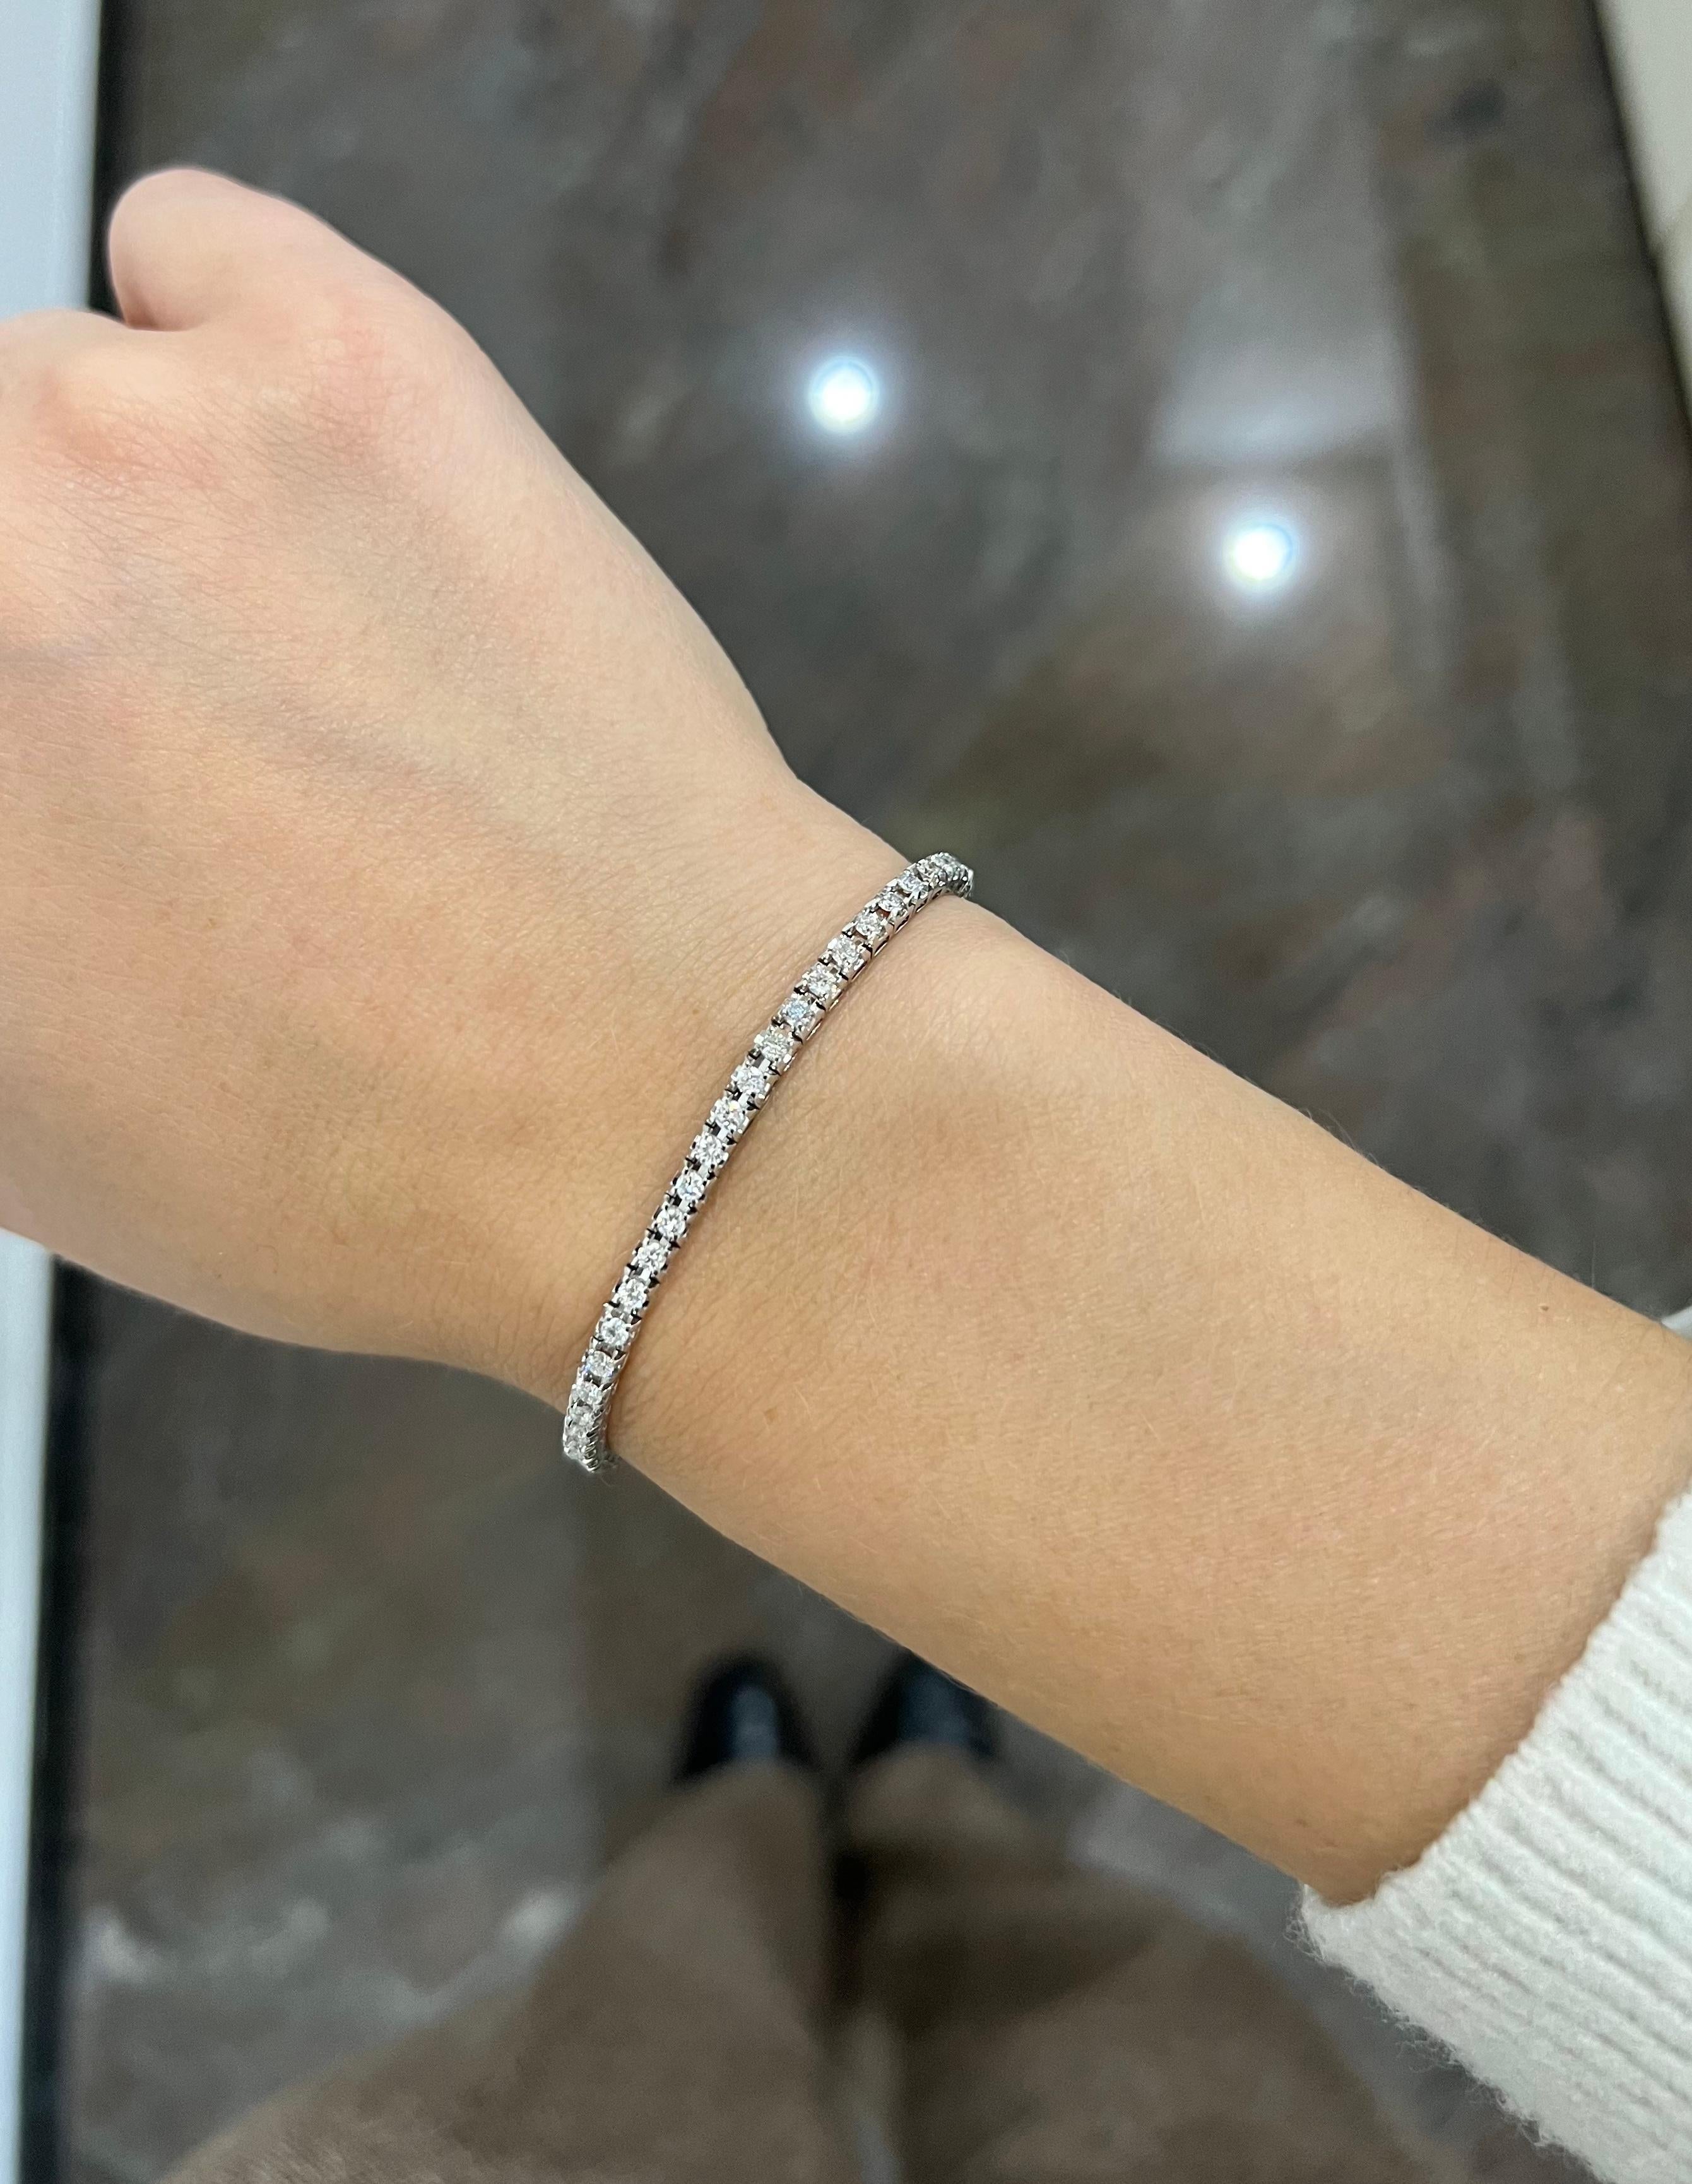 Elevate your style with this exquisite 18K White Gold Four Prong Tennis Bracelet. Crafted with meticulous attention to detail, it features a continuous line of dazzling round-cut natural diamonds, totalling 8.00 carats. 

Each diamond is expertly